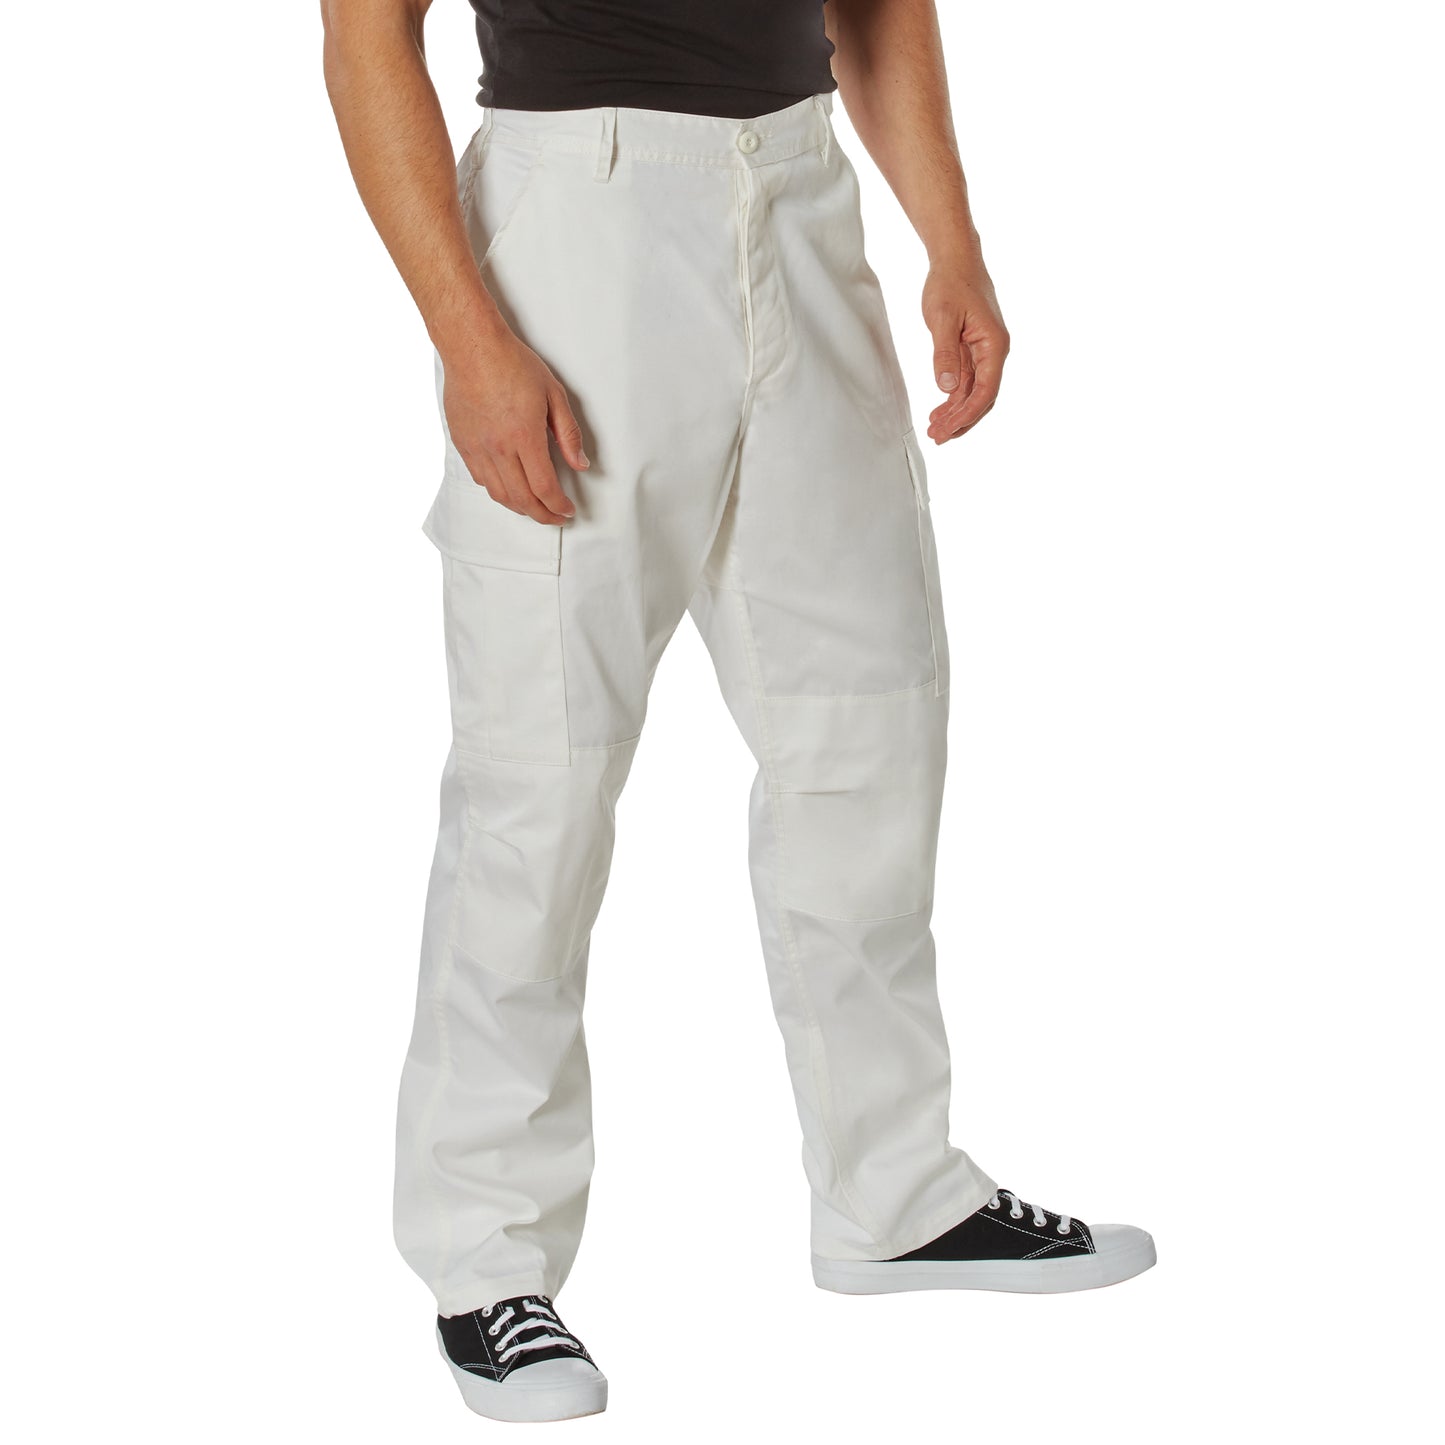 Rothco Tactical BDU Cargo Pants - Off White